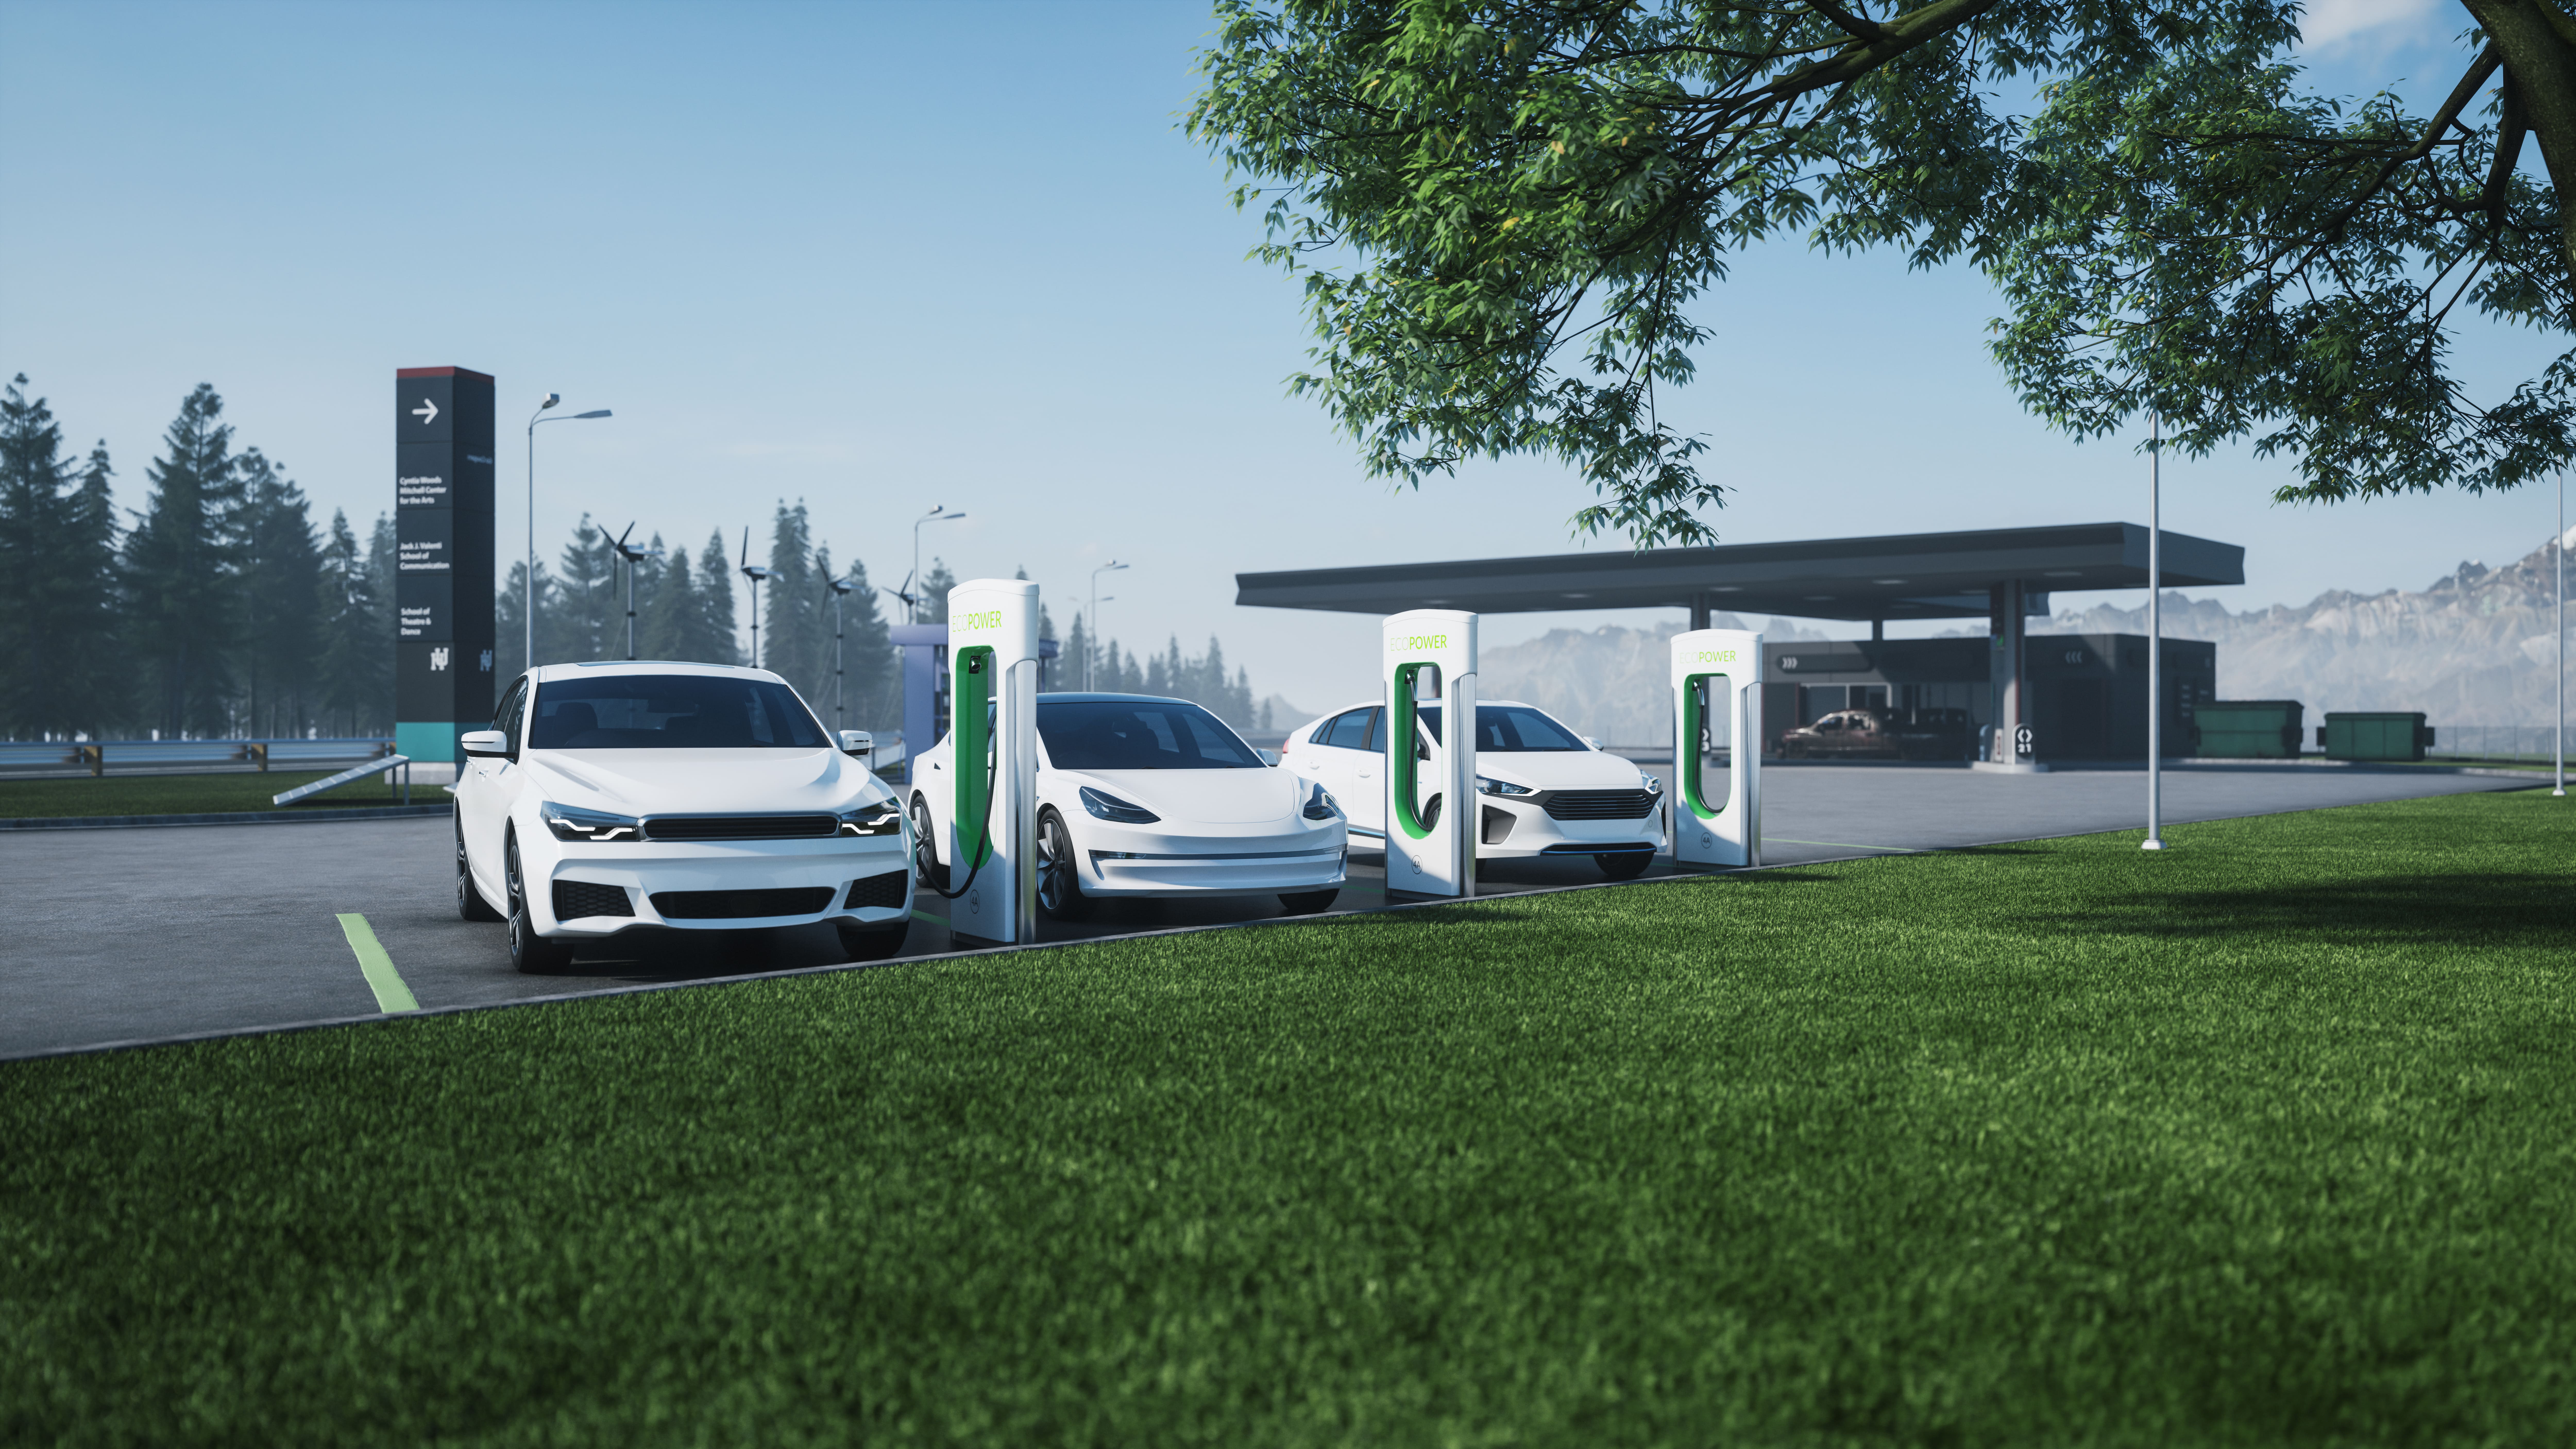 Would More EV Charging Stations Help With the Current Fuel Crisis?